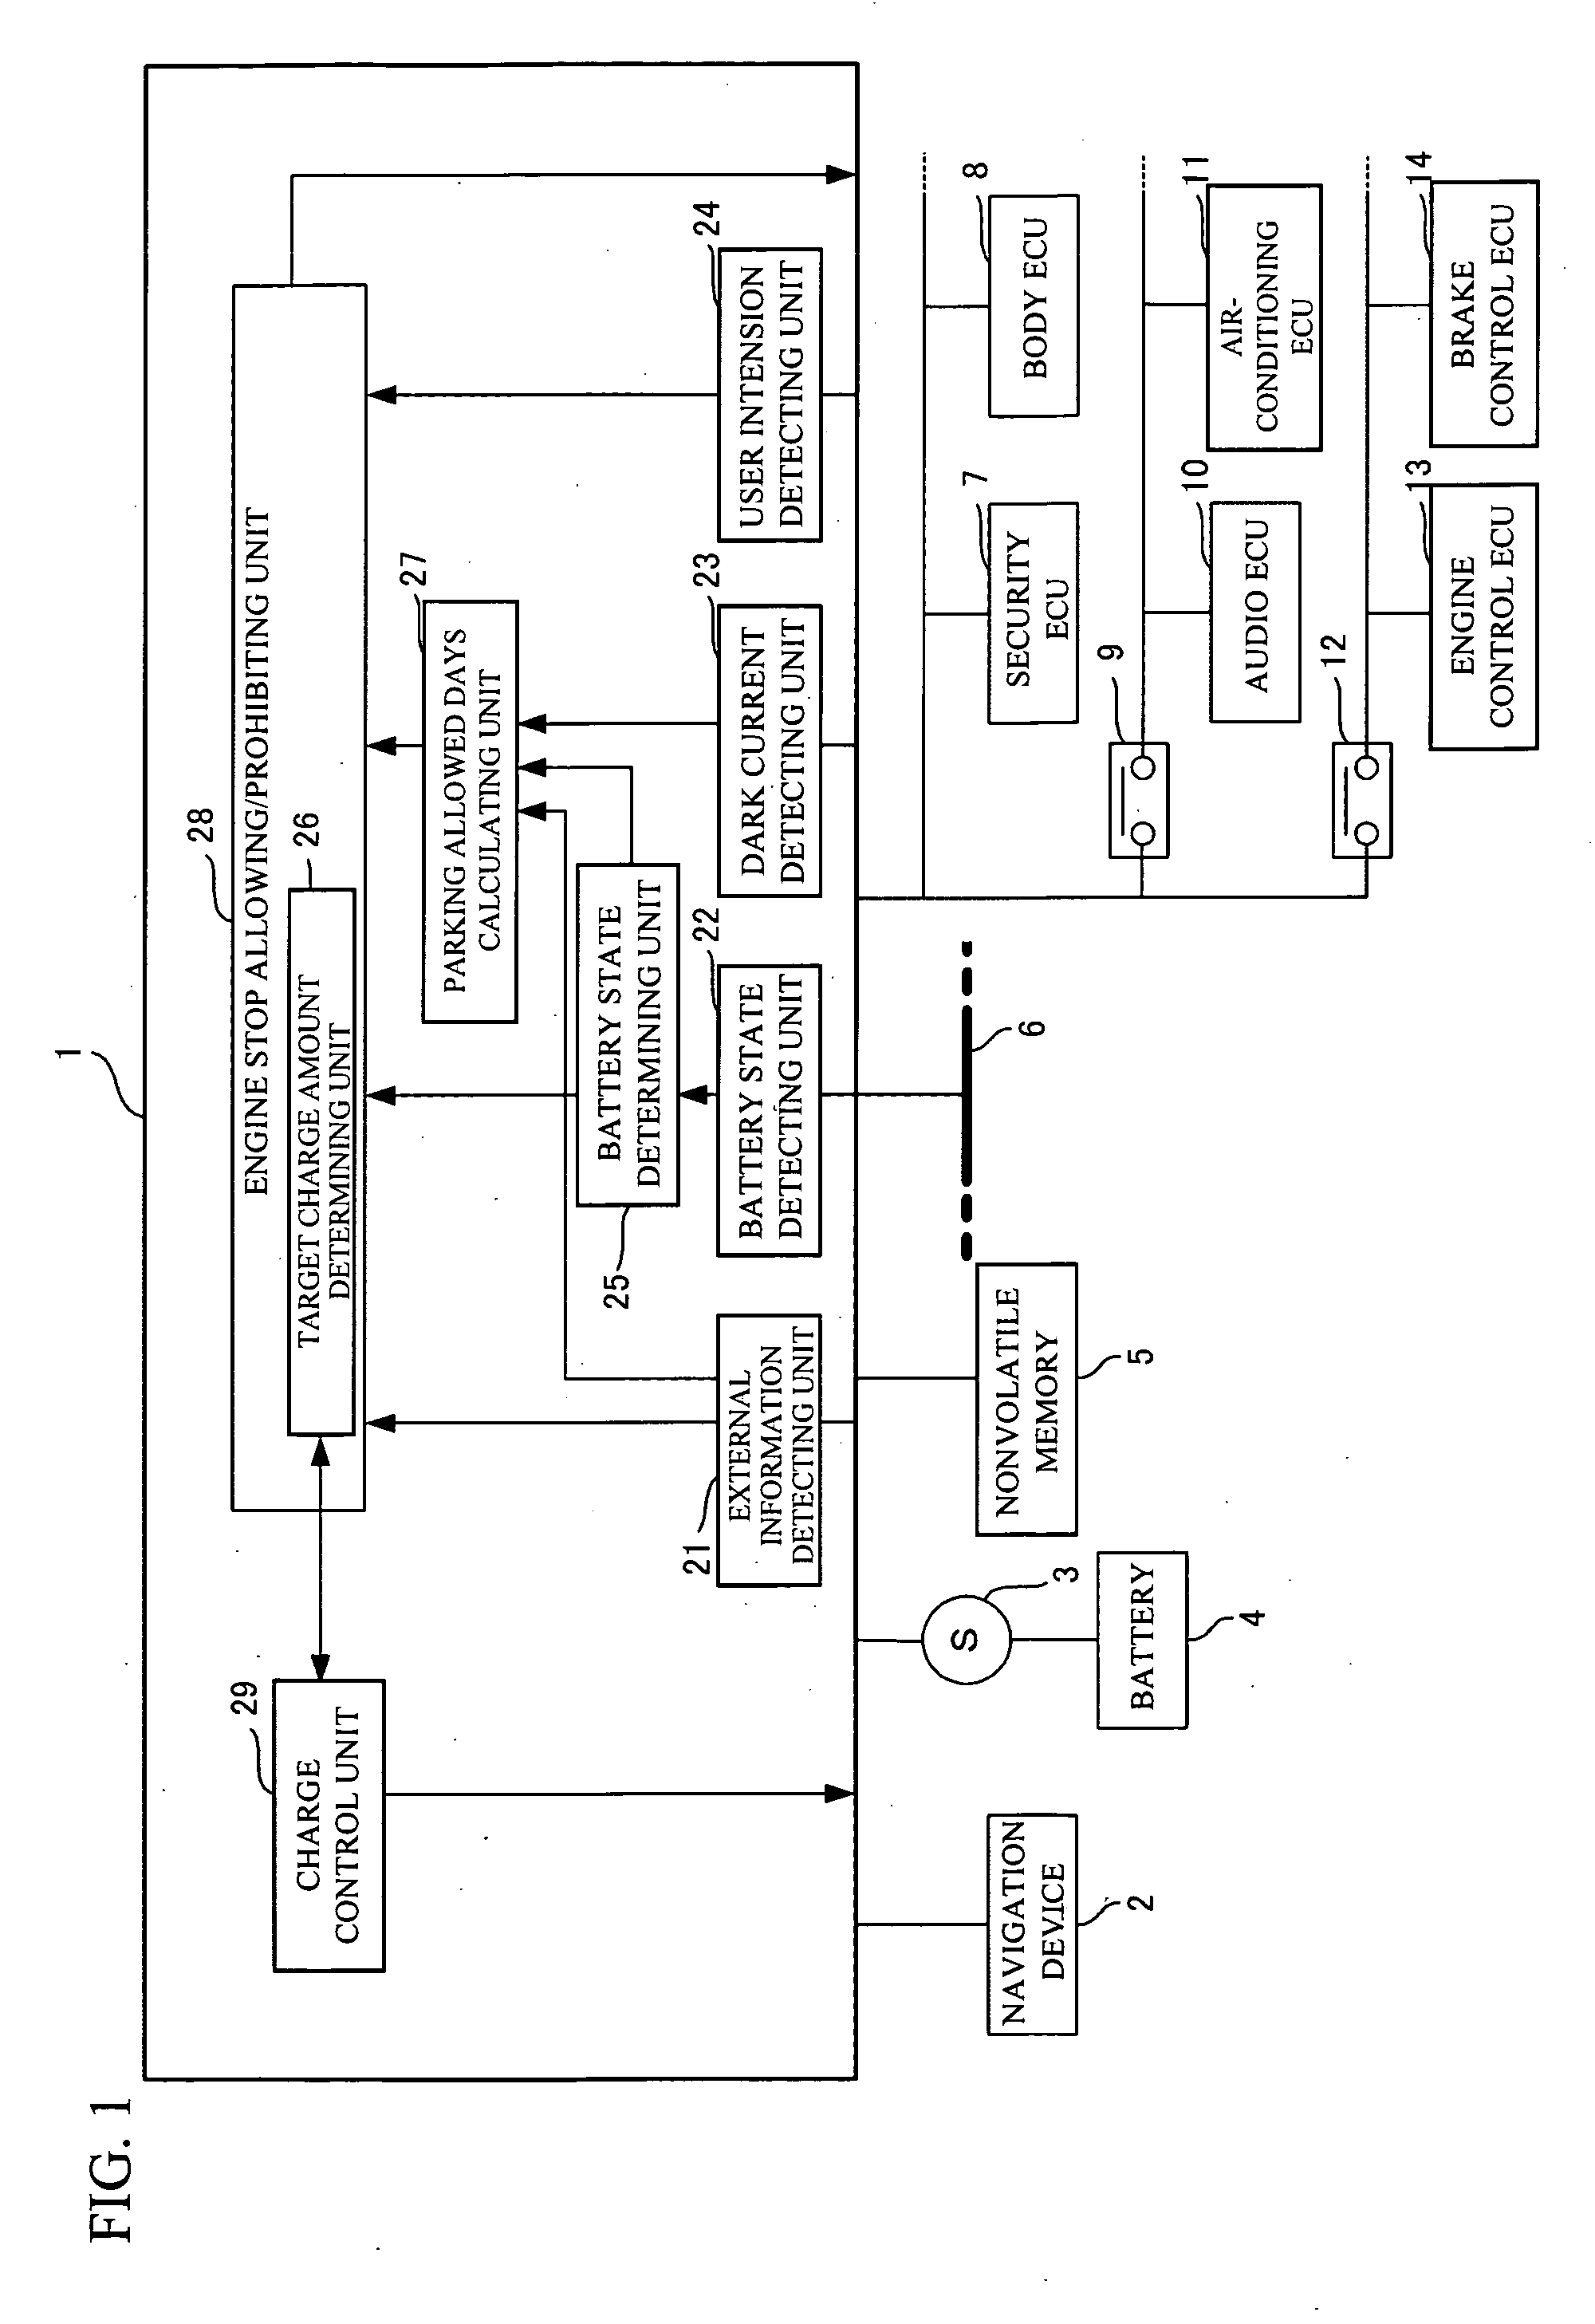 Power management device and computer readable medium